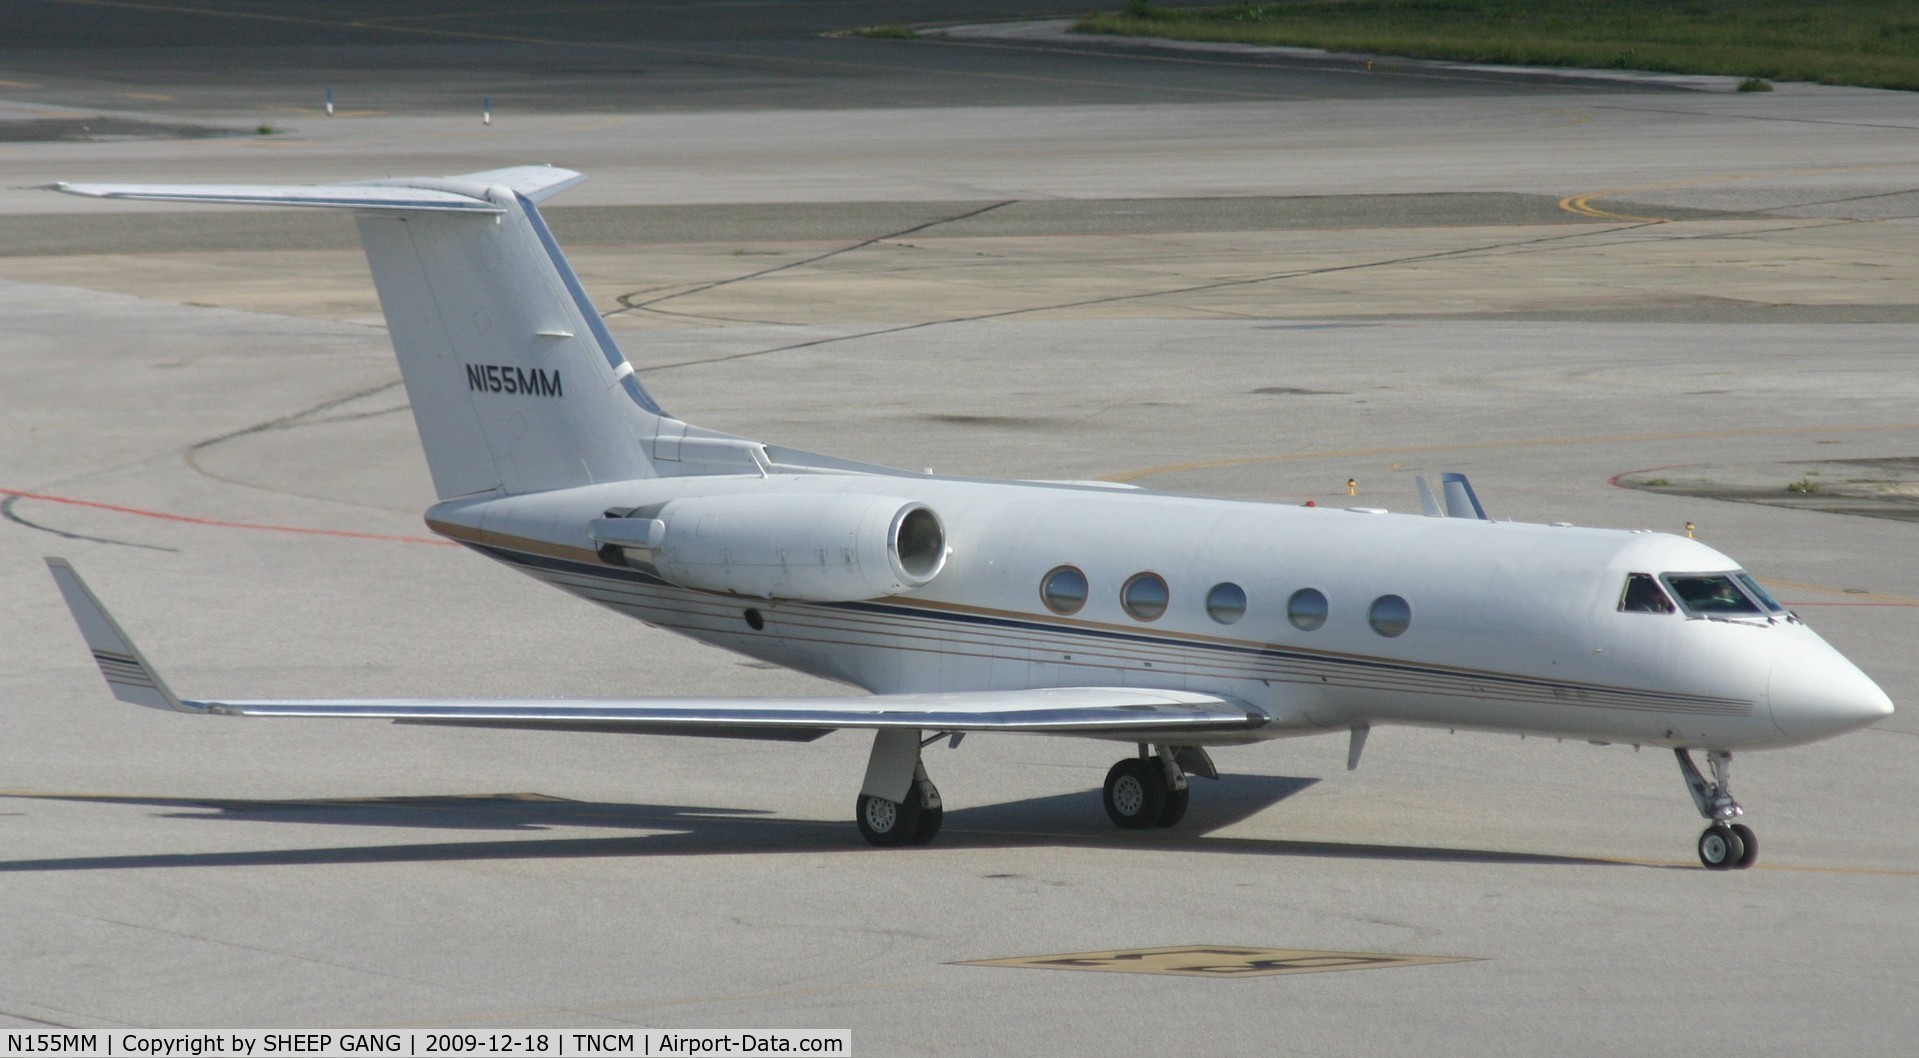 N155MM, 1981 Gulfstream American G-1159A Gulfstream III C/N 325, N155MM taxing to holding point Alpha for take off